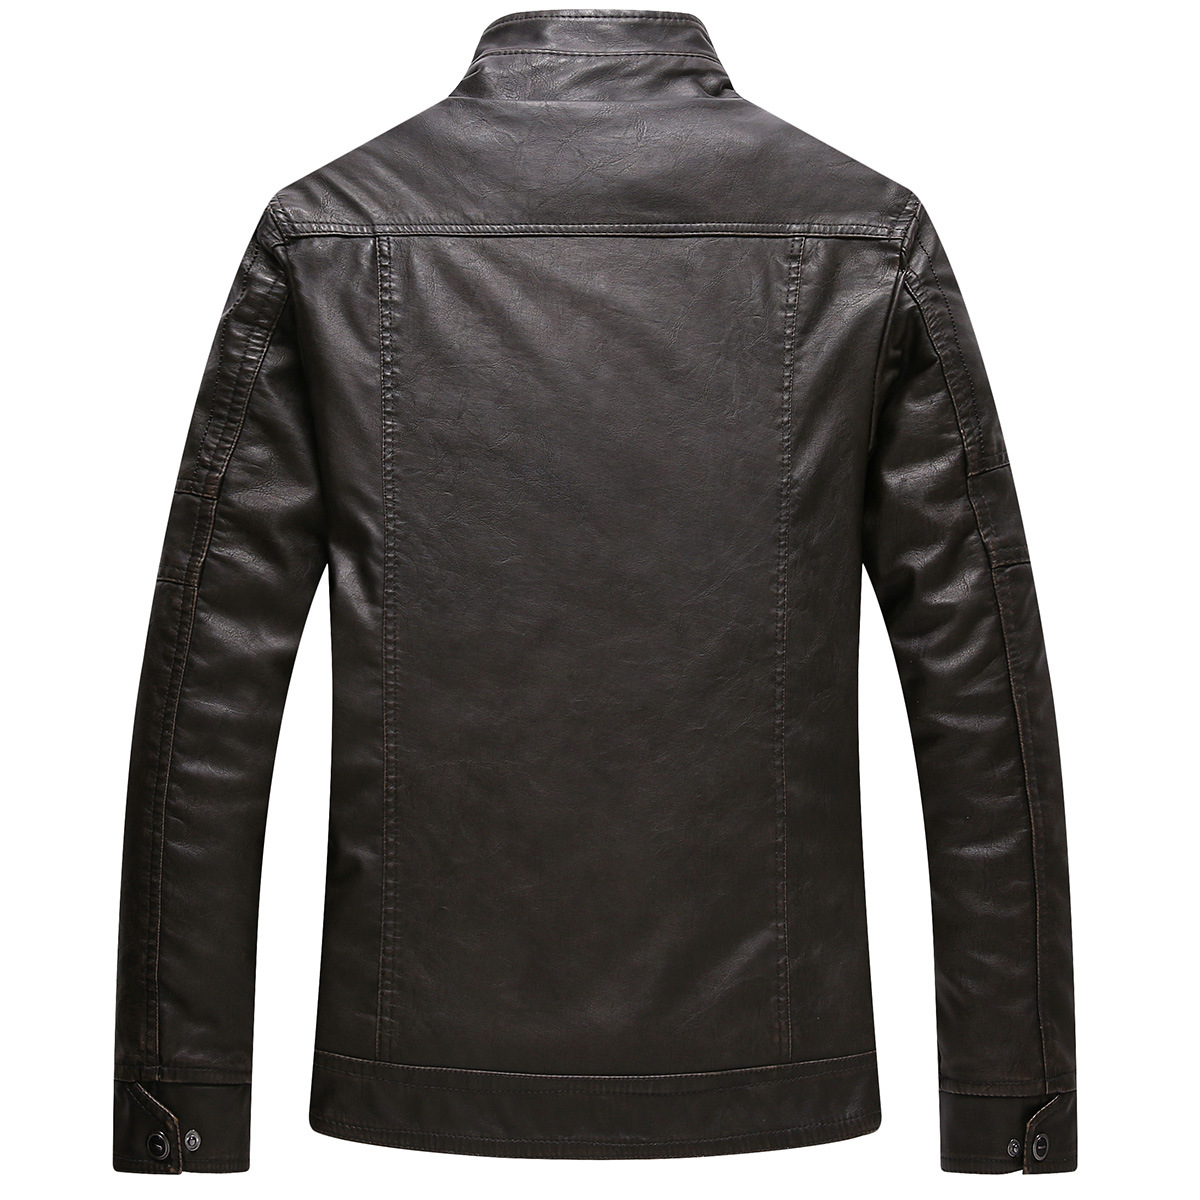 Men's Cool Stylish Stand Collar Lightweight Bomber Faux Leather Jacket Coat black -back side